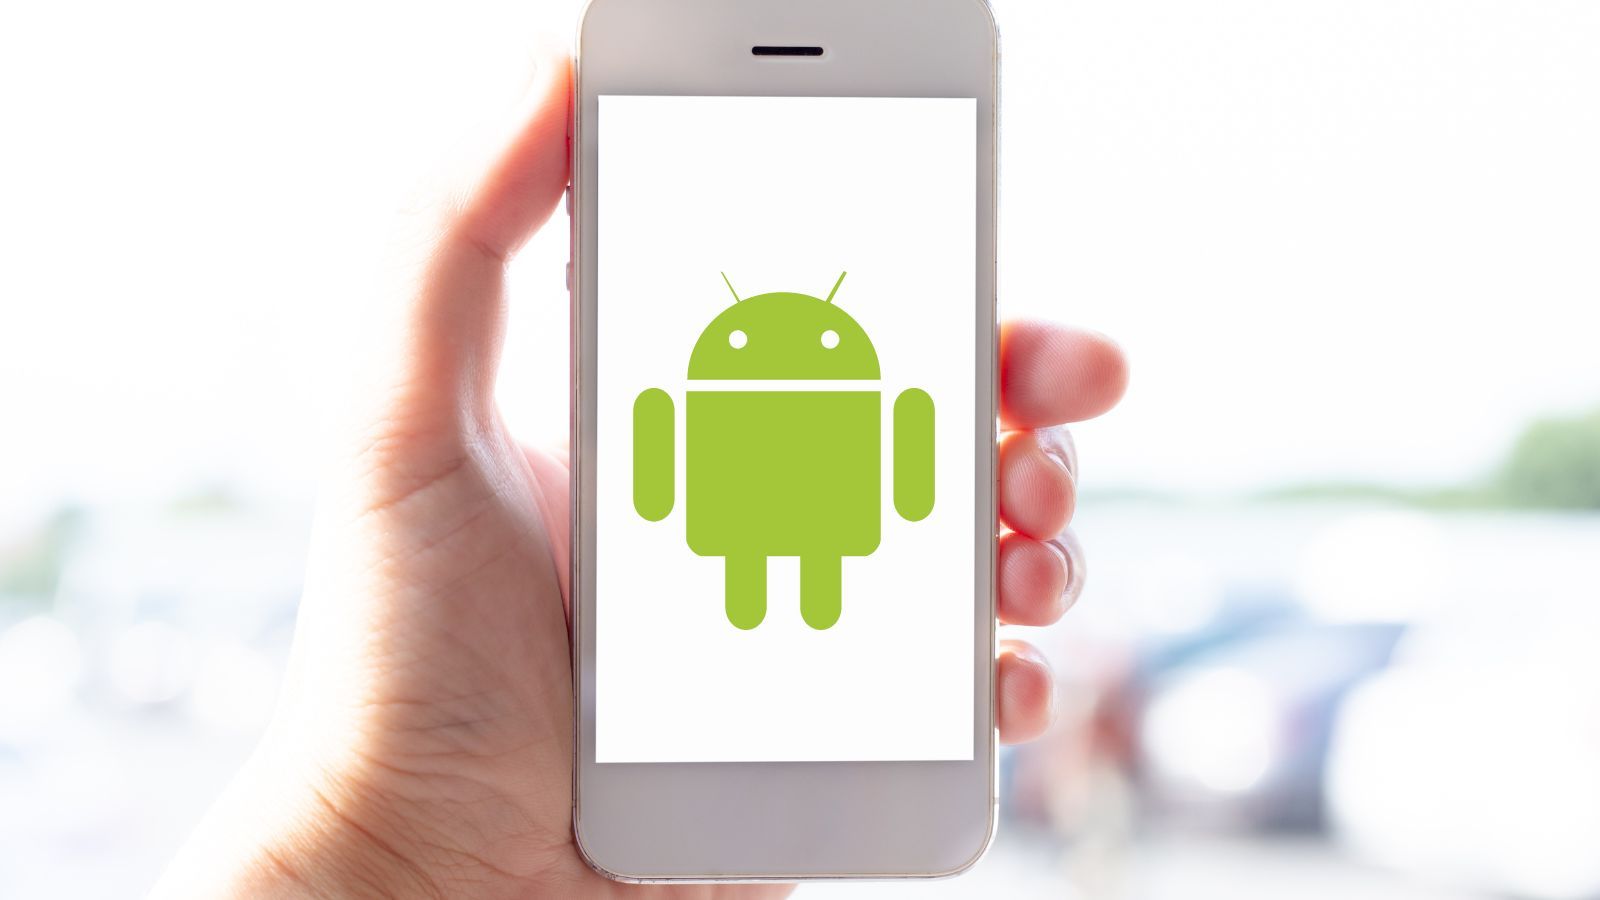 Android, scaricate SUBITO queste app GRATIS dal Play Store